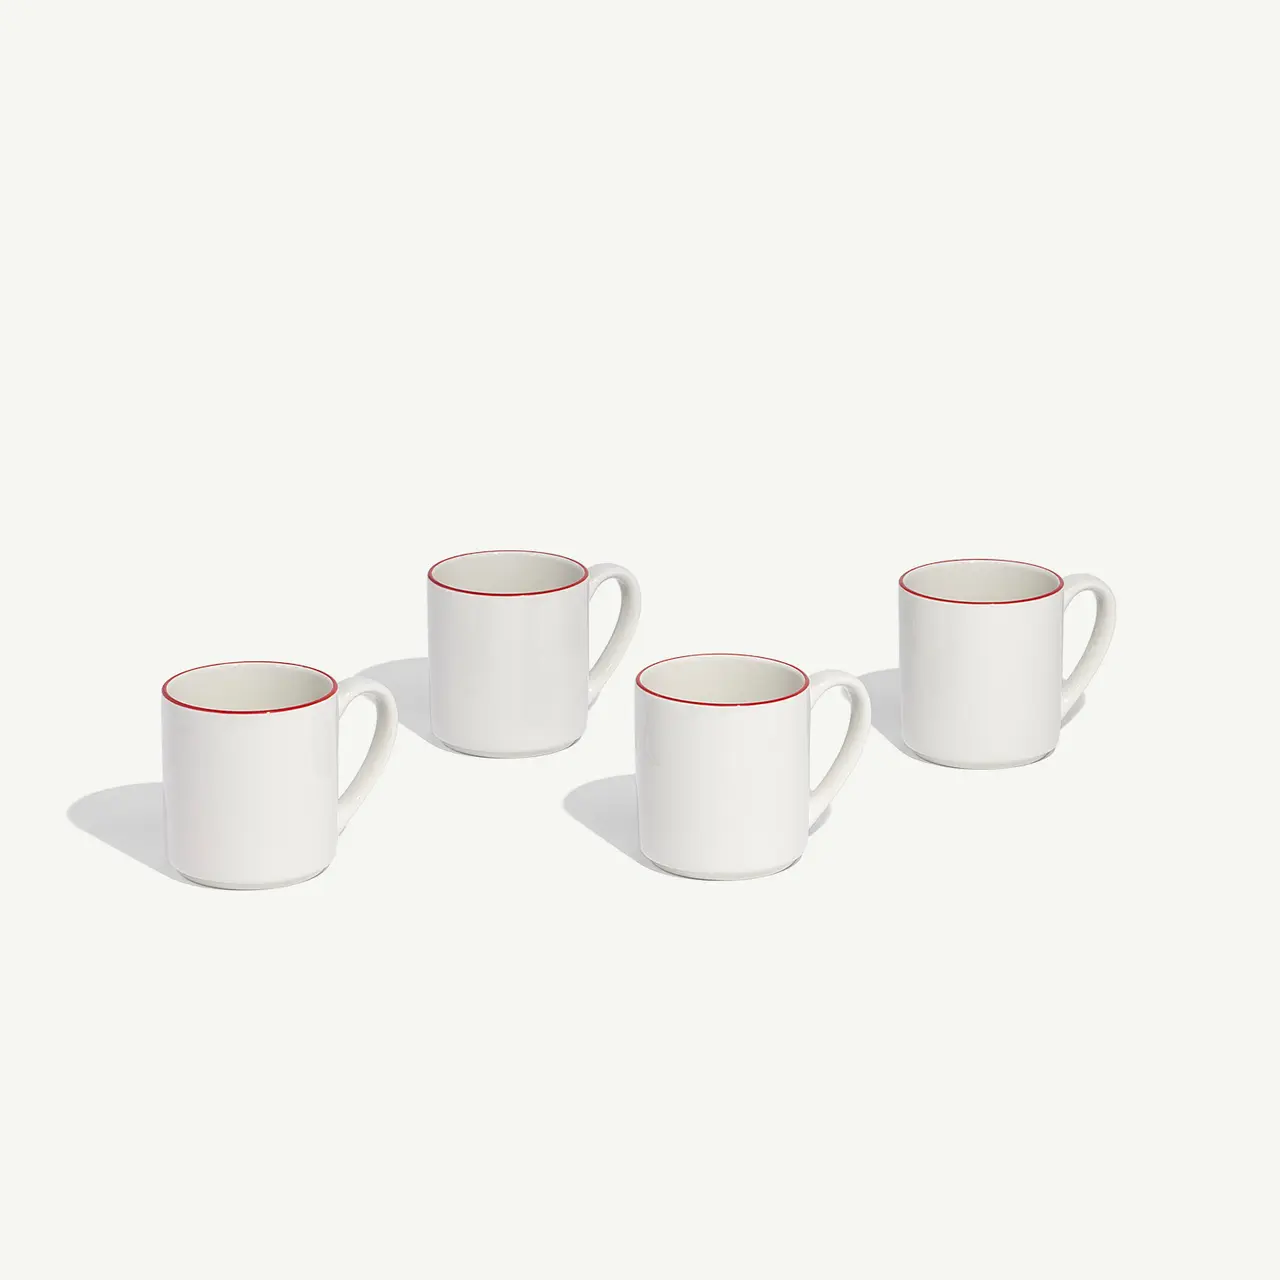 Four white mugs with red rims are arranged in a line on a light background.